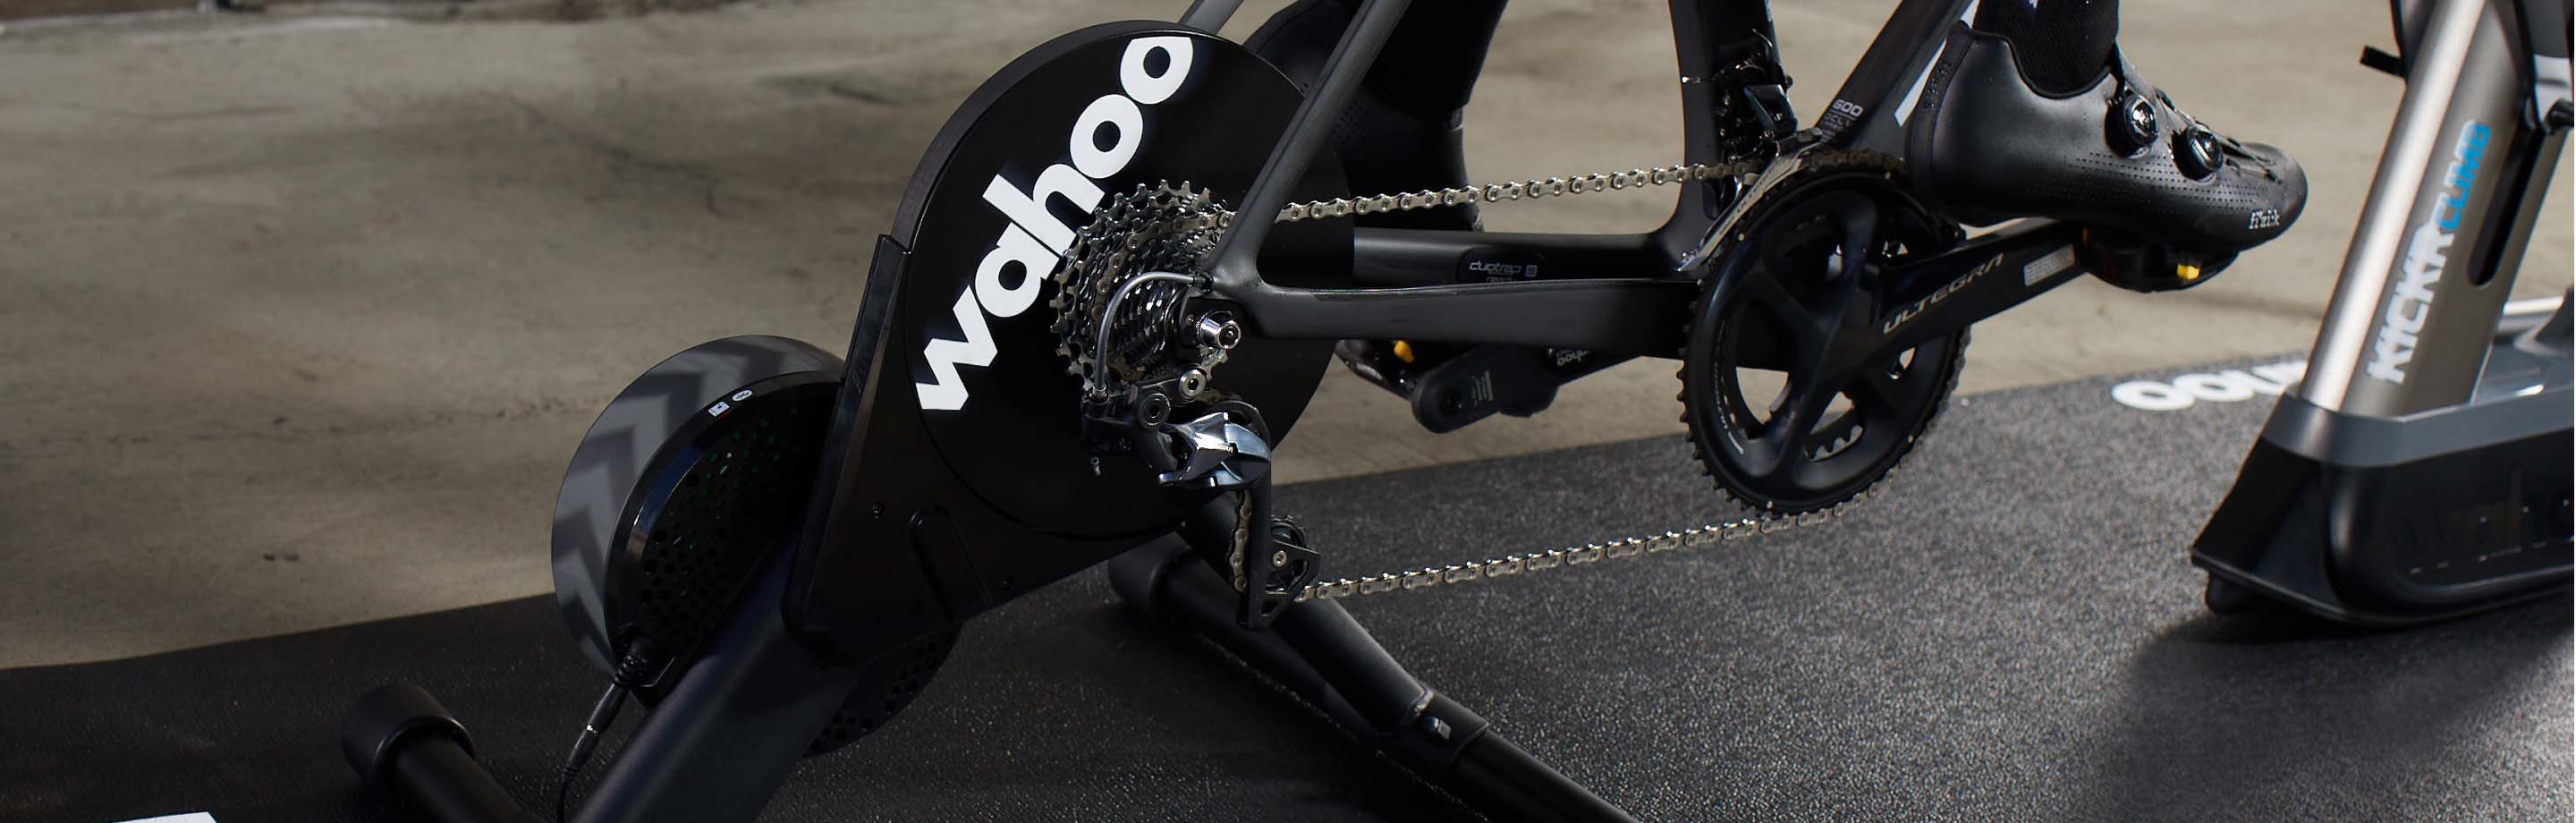 Wahoo Fitness - Fitness accessories for running and cycling